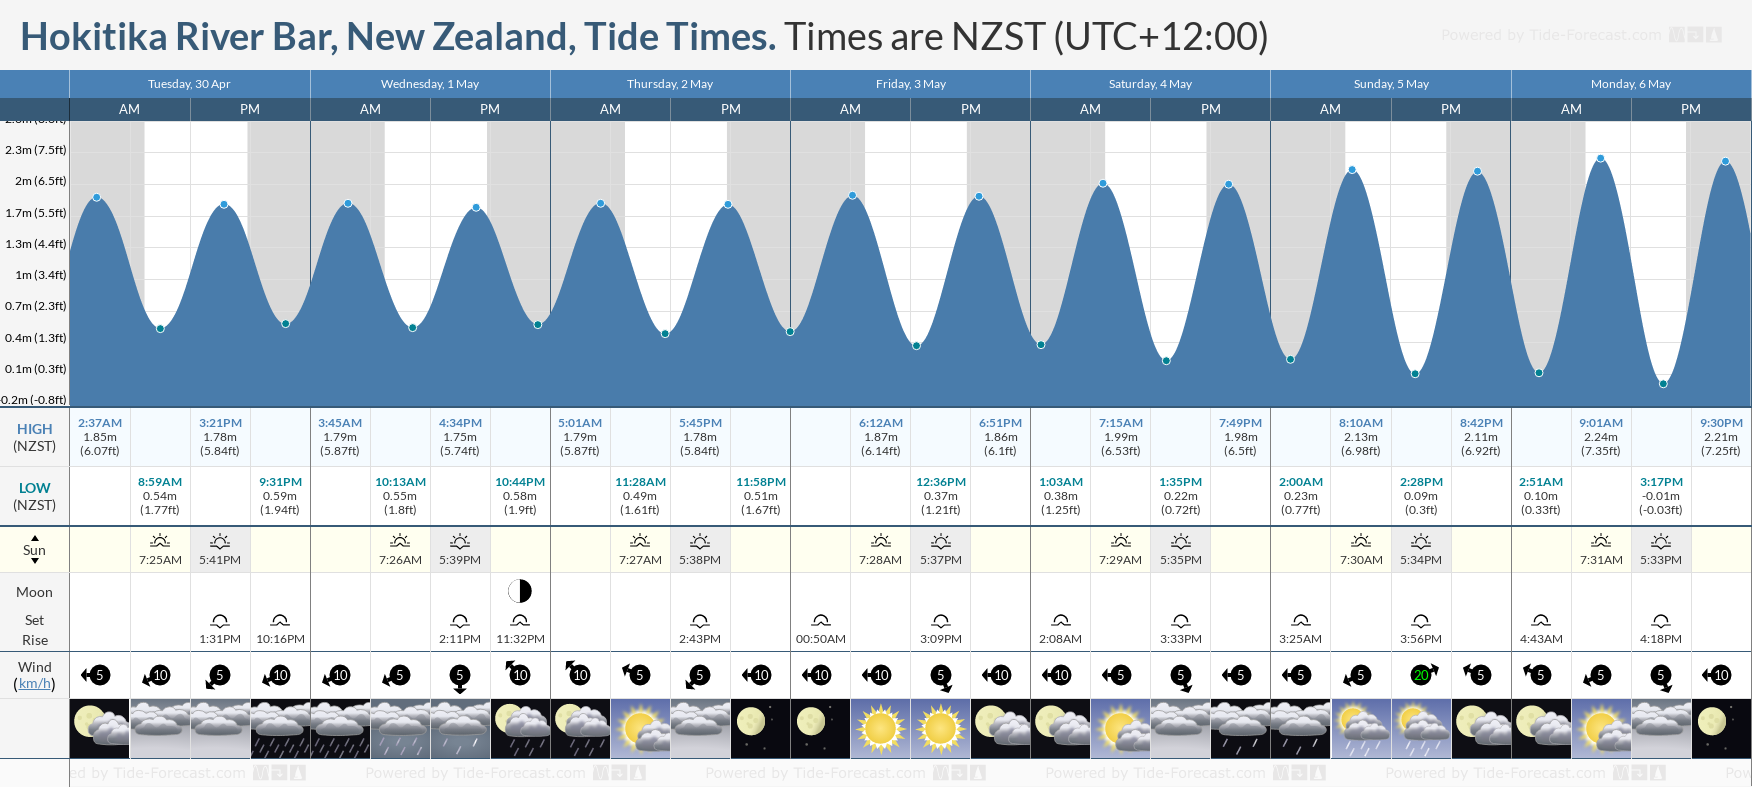 Hokitika River Bar, New Zealand Tide Chart including high and low tide tide times for the next 7 days